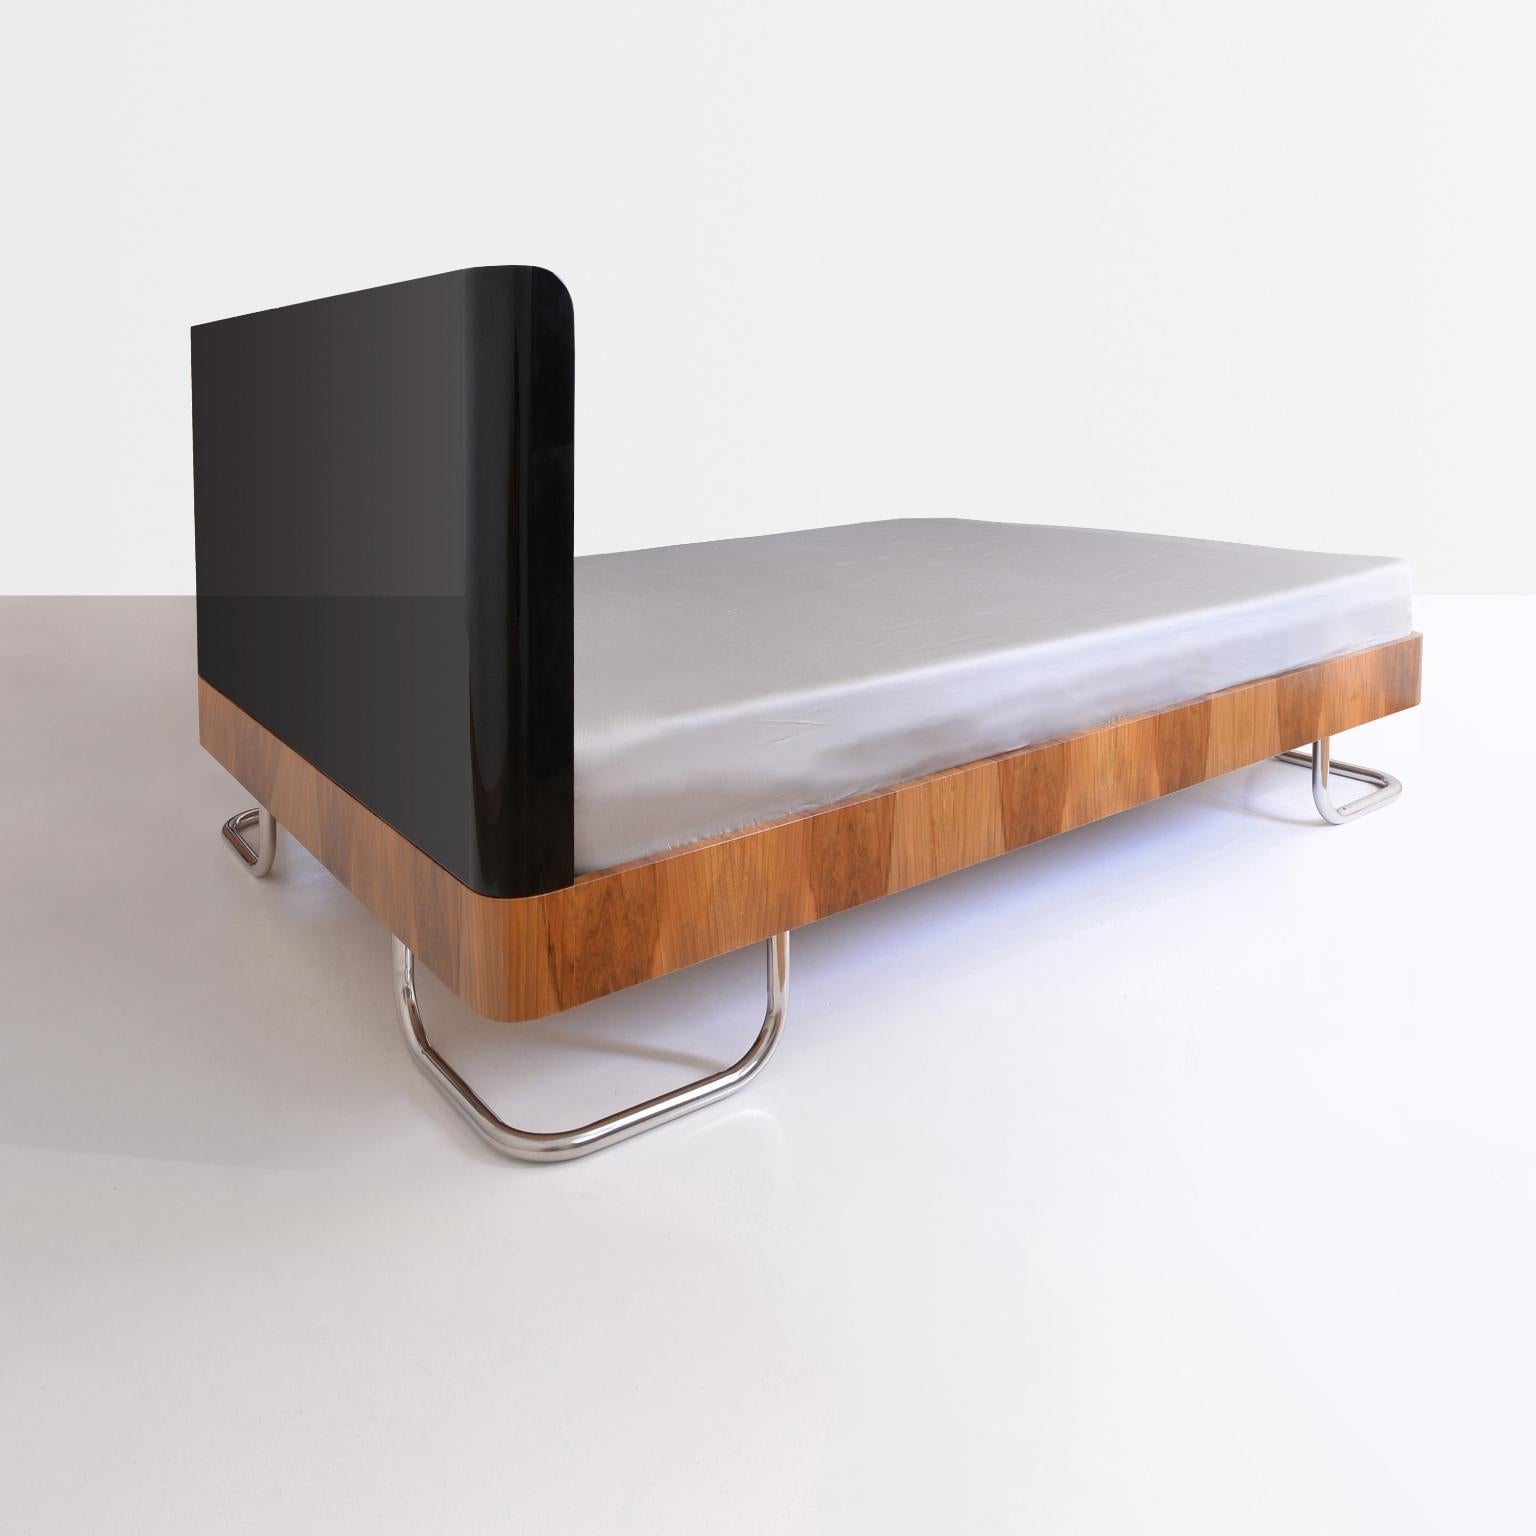 Bespoke Modern Contemporary Double Bed with Bedside Cabinets in Handcrafted Wood In New Condition For Sale In Berlin, DE